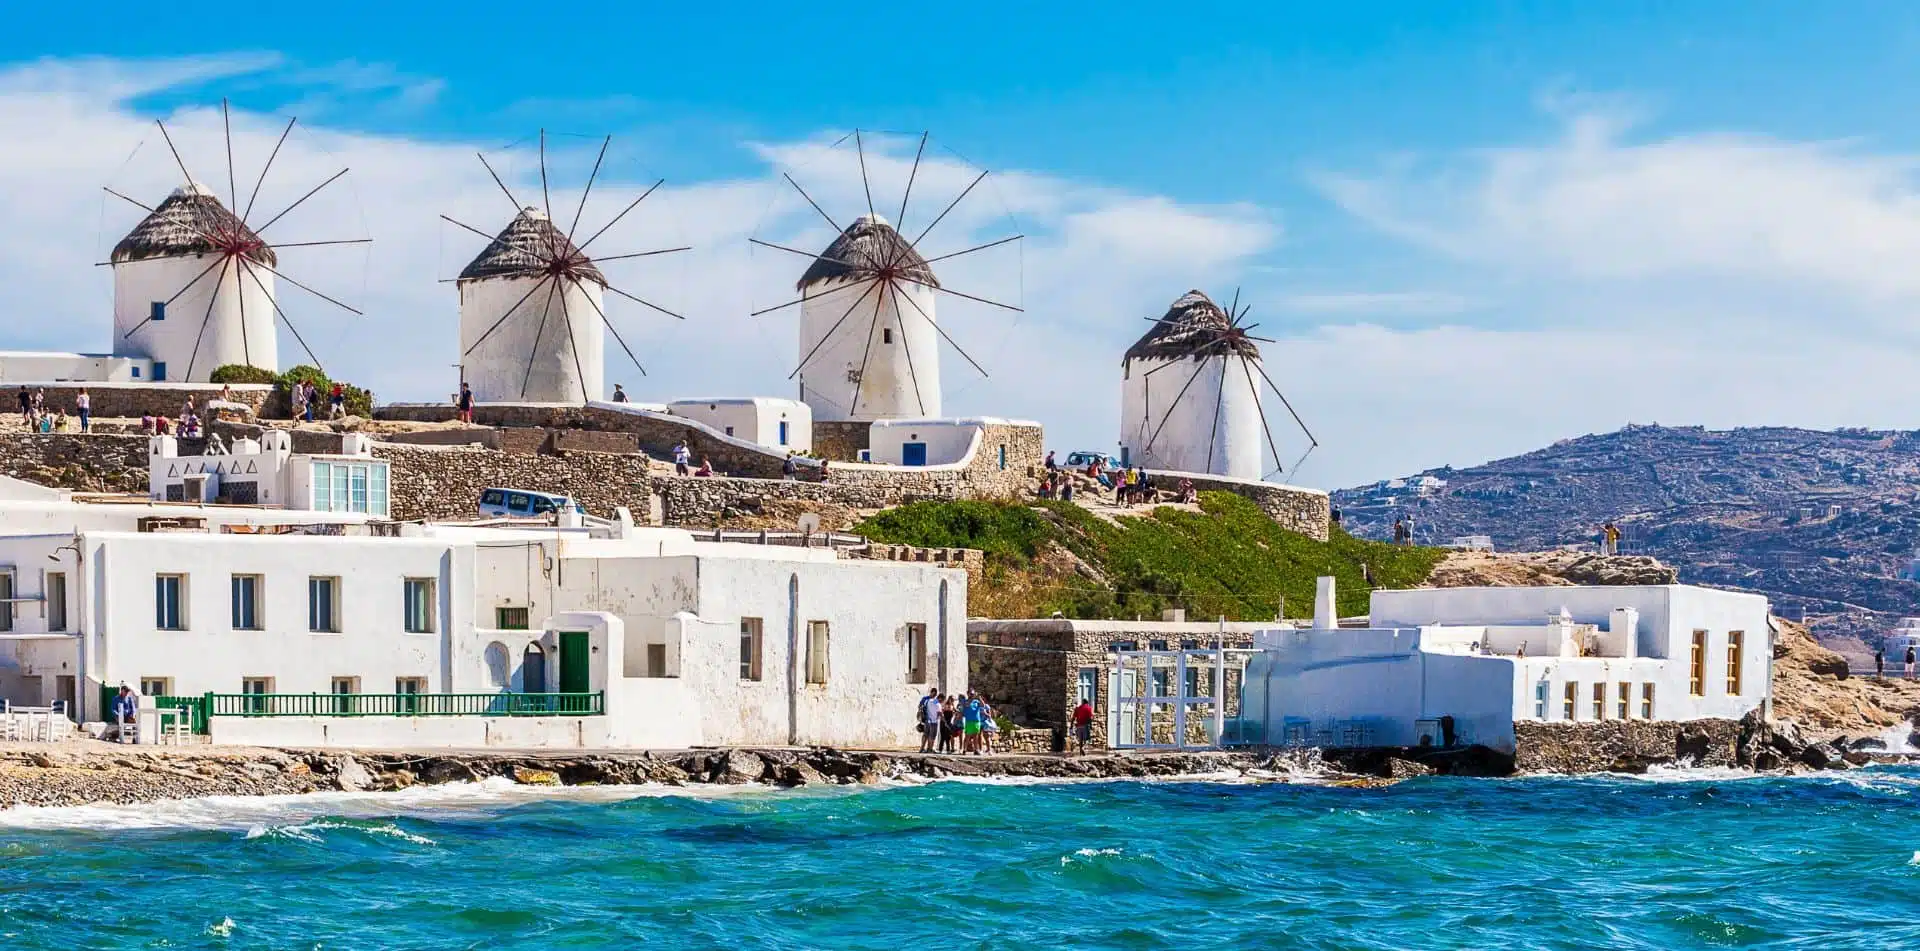 The picture-perfect windmills of Mykonos